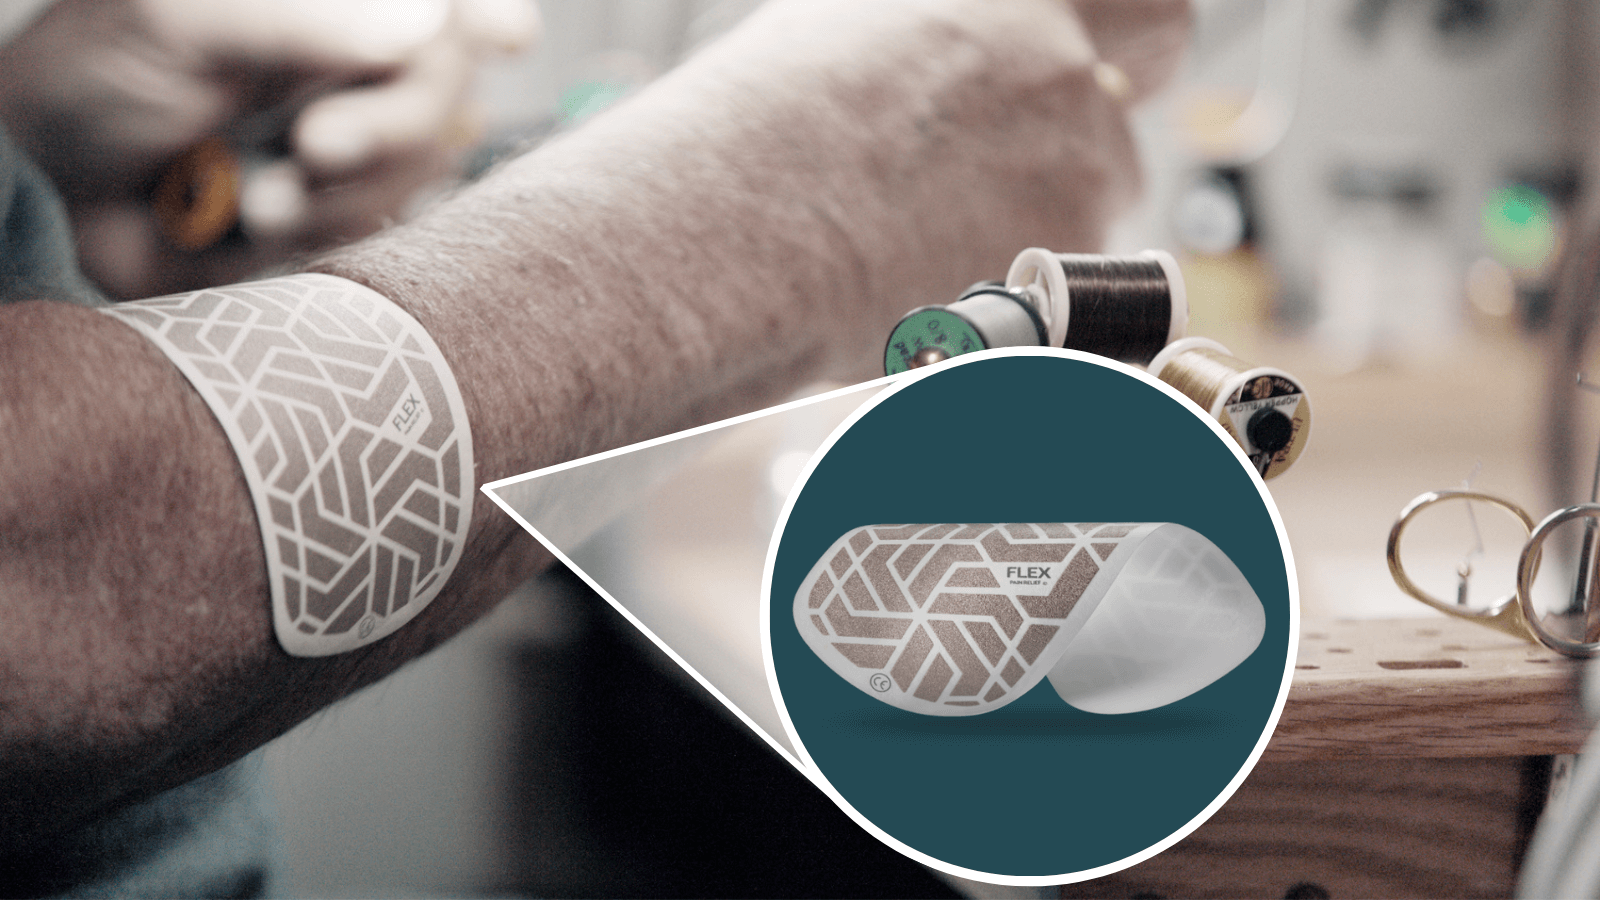 This New Flexible, Drug-Free "Miracle Patch" Can Relieve Pain Anywhere on the Body in Seconds